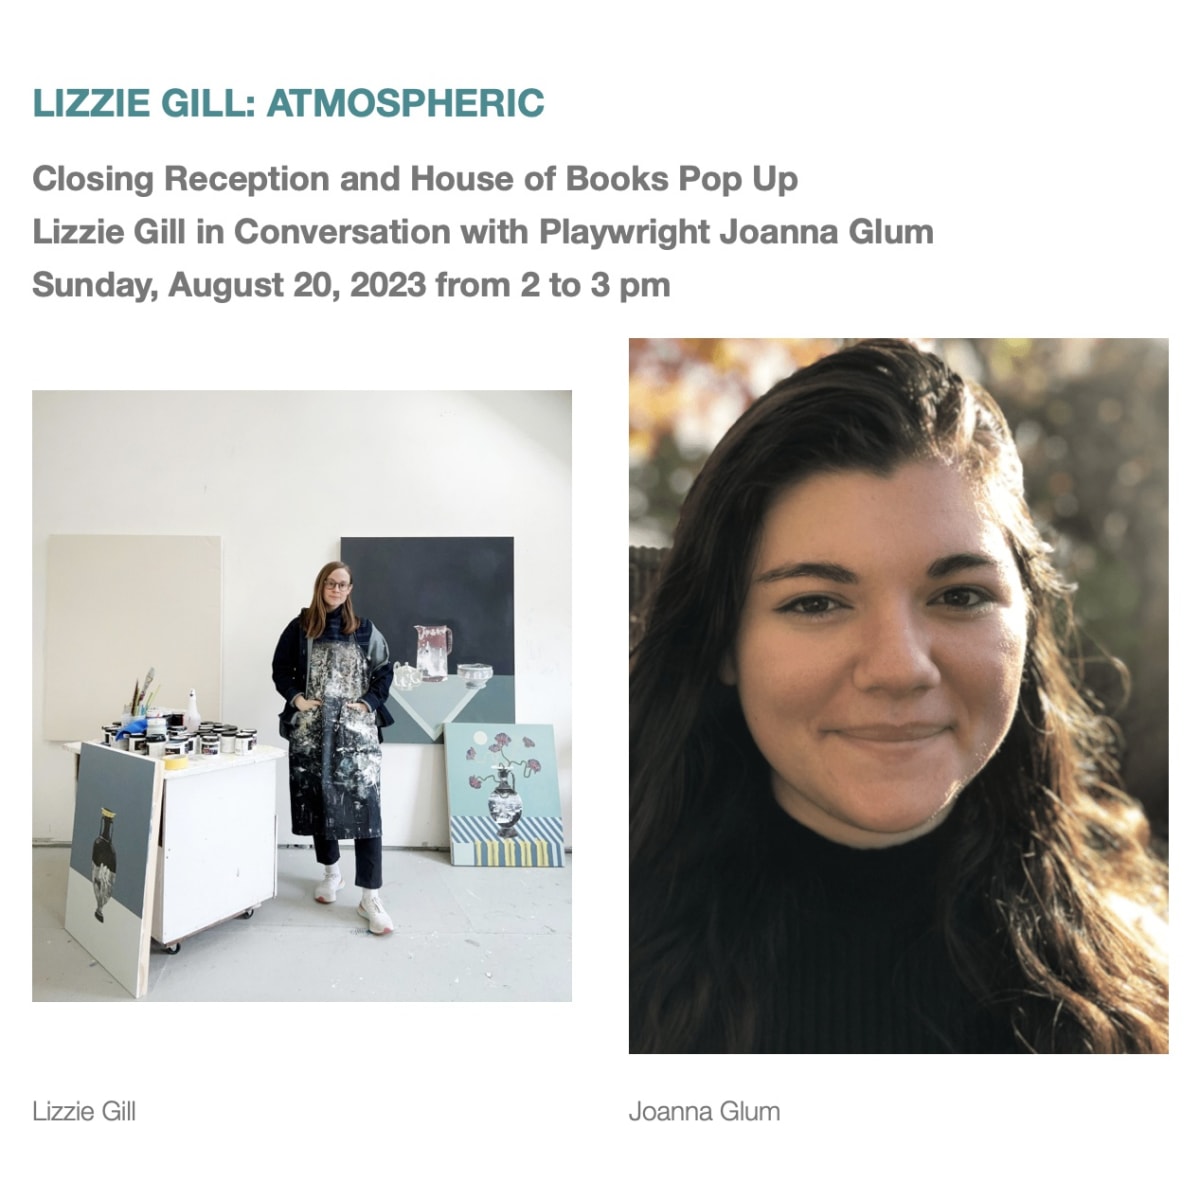 Lizzie Gill: Atmospheric, closing reception